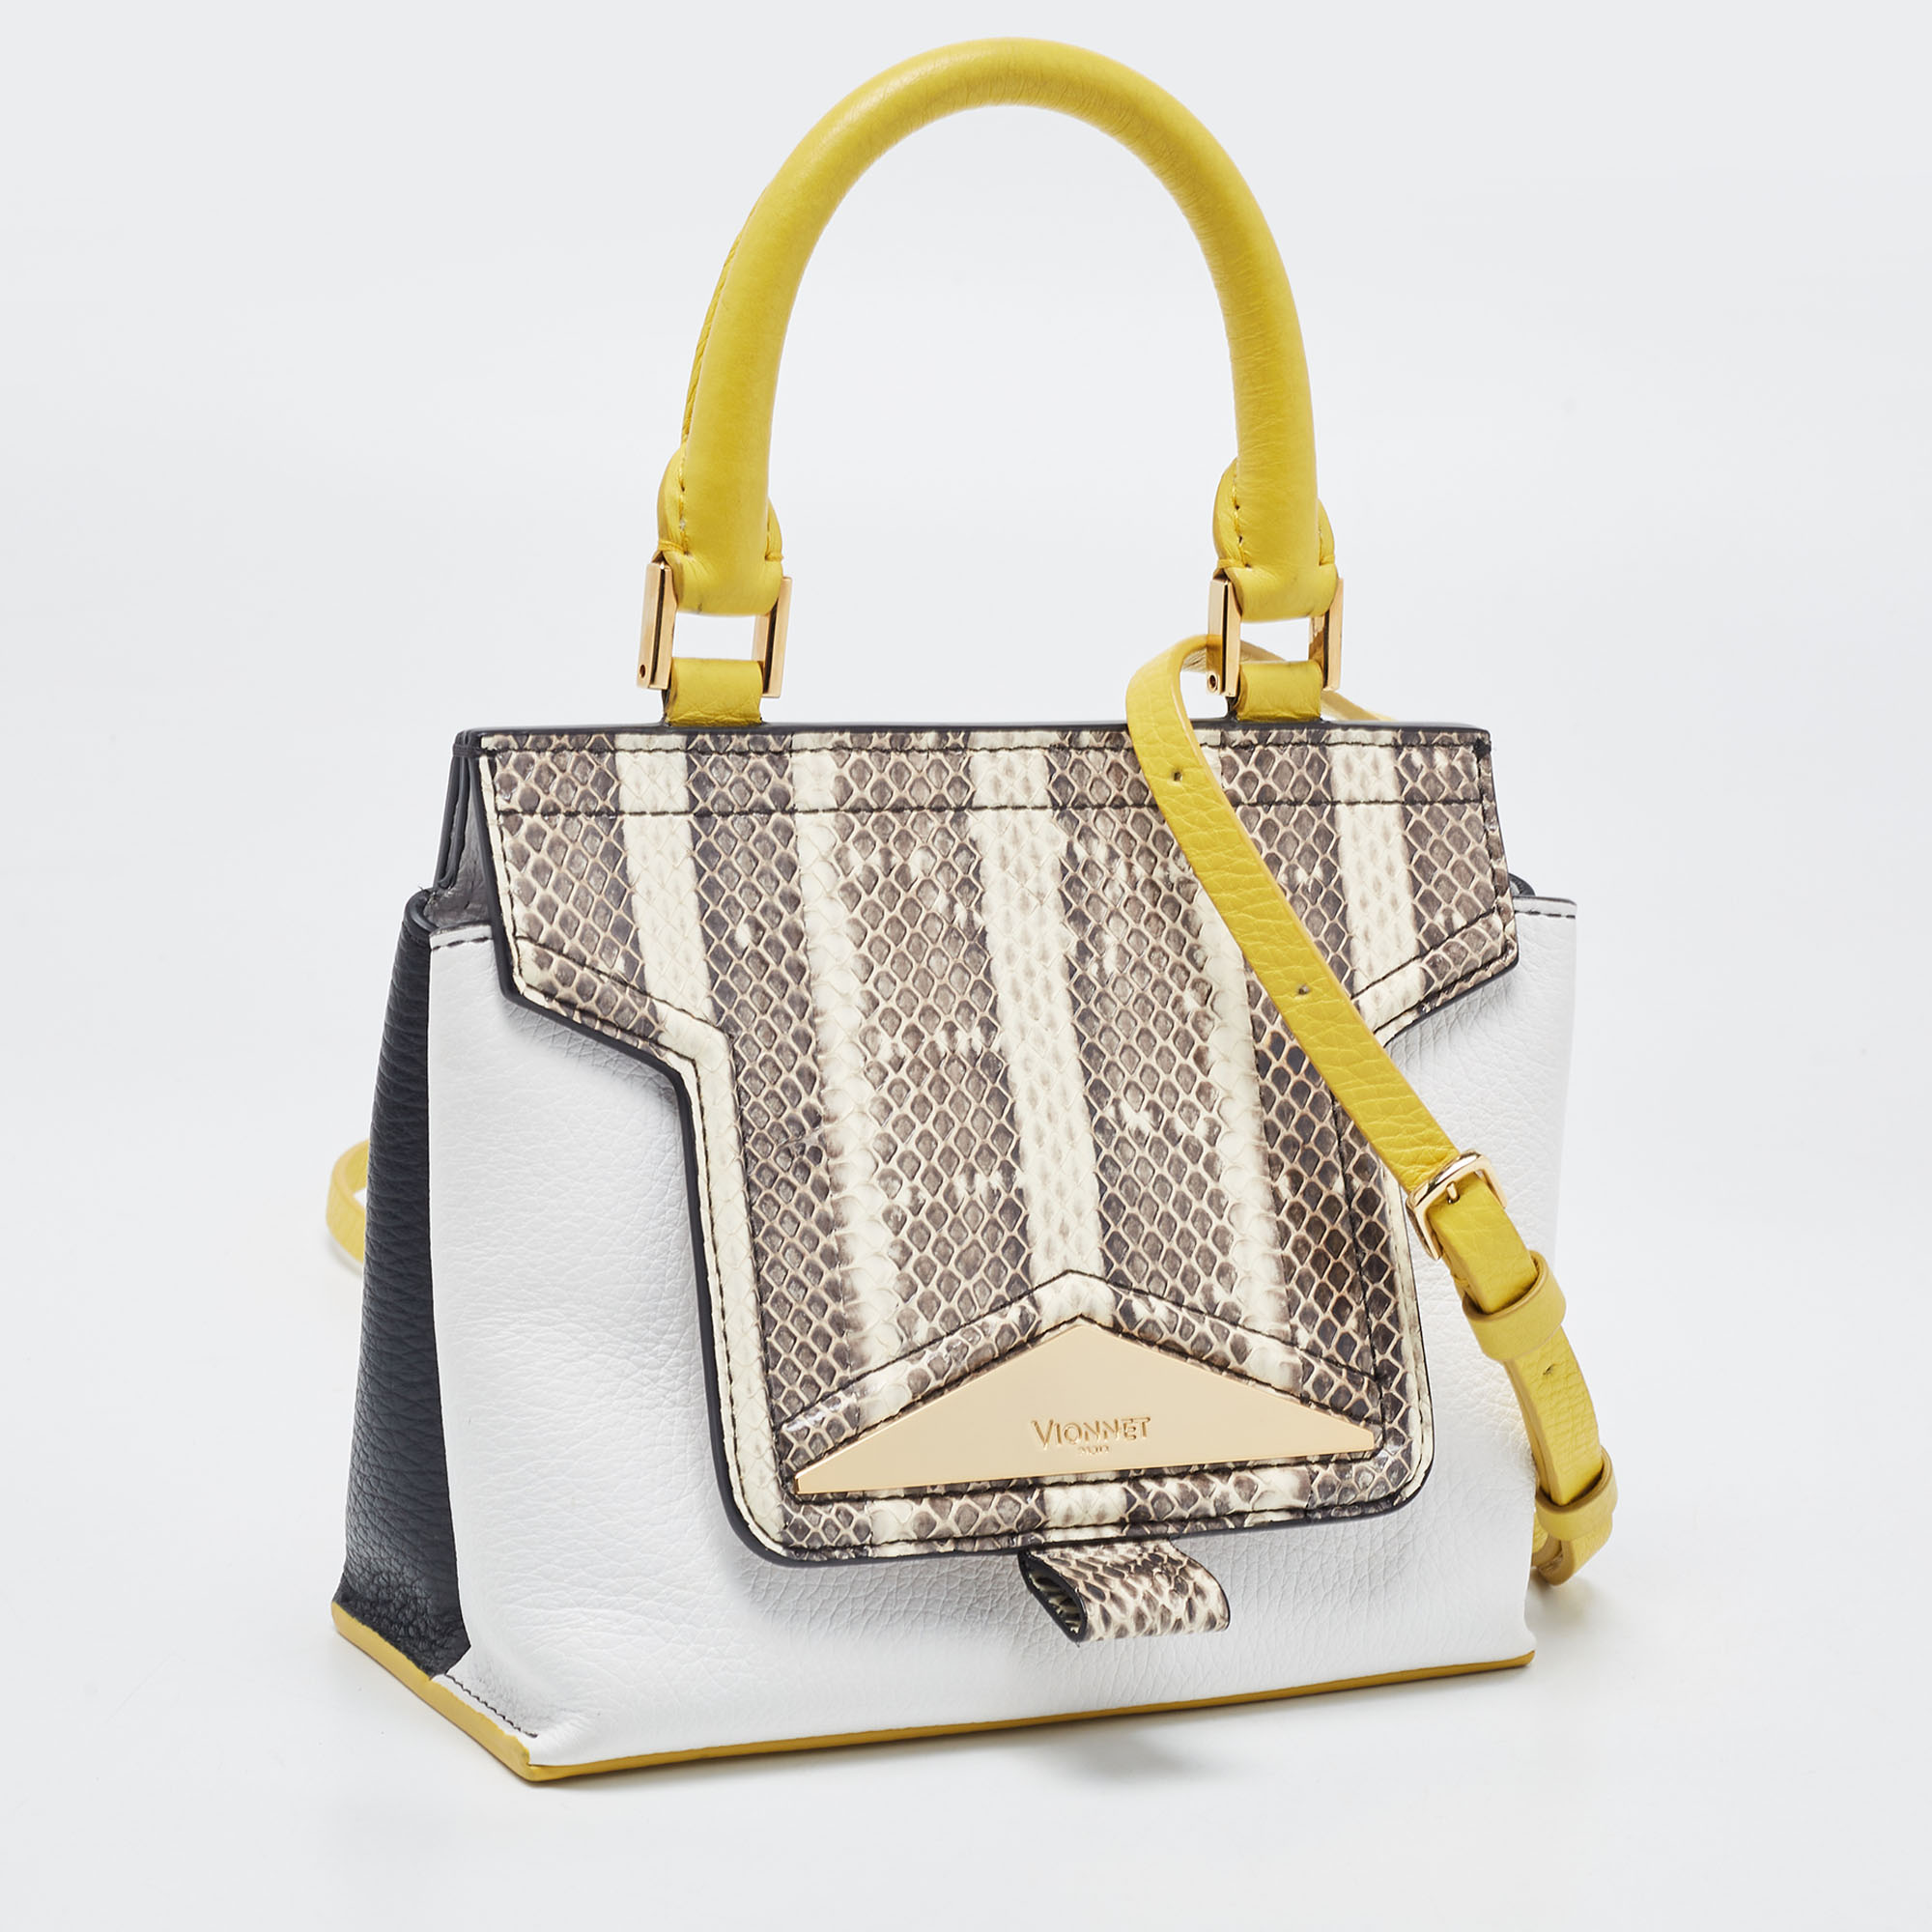 Vionnet Multicolor Snakeskin And Leather Top Handle Bag